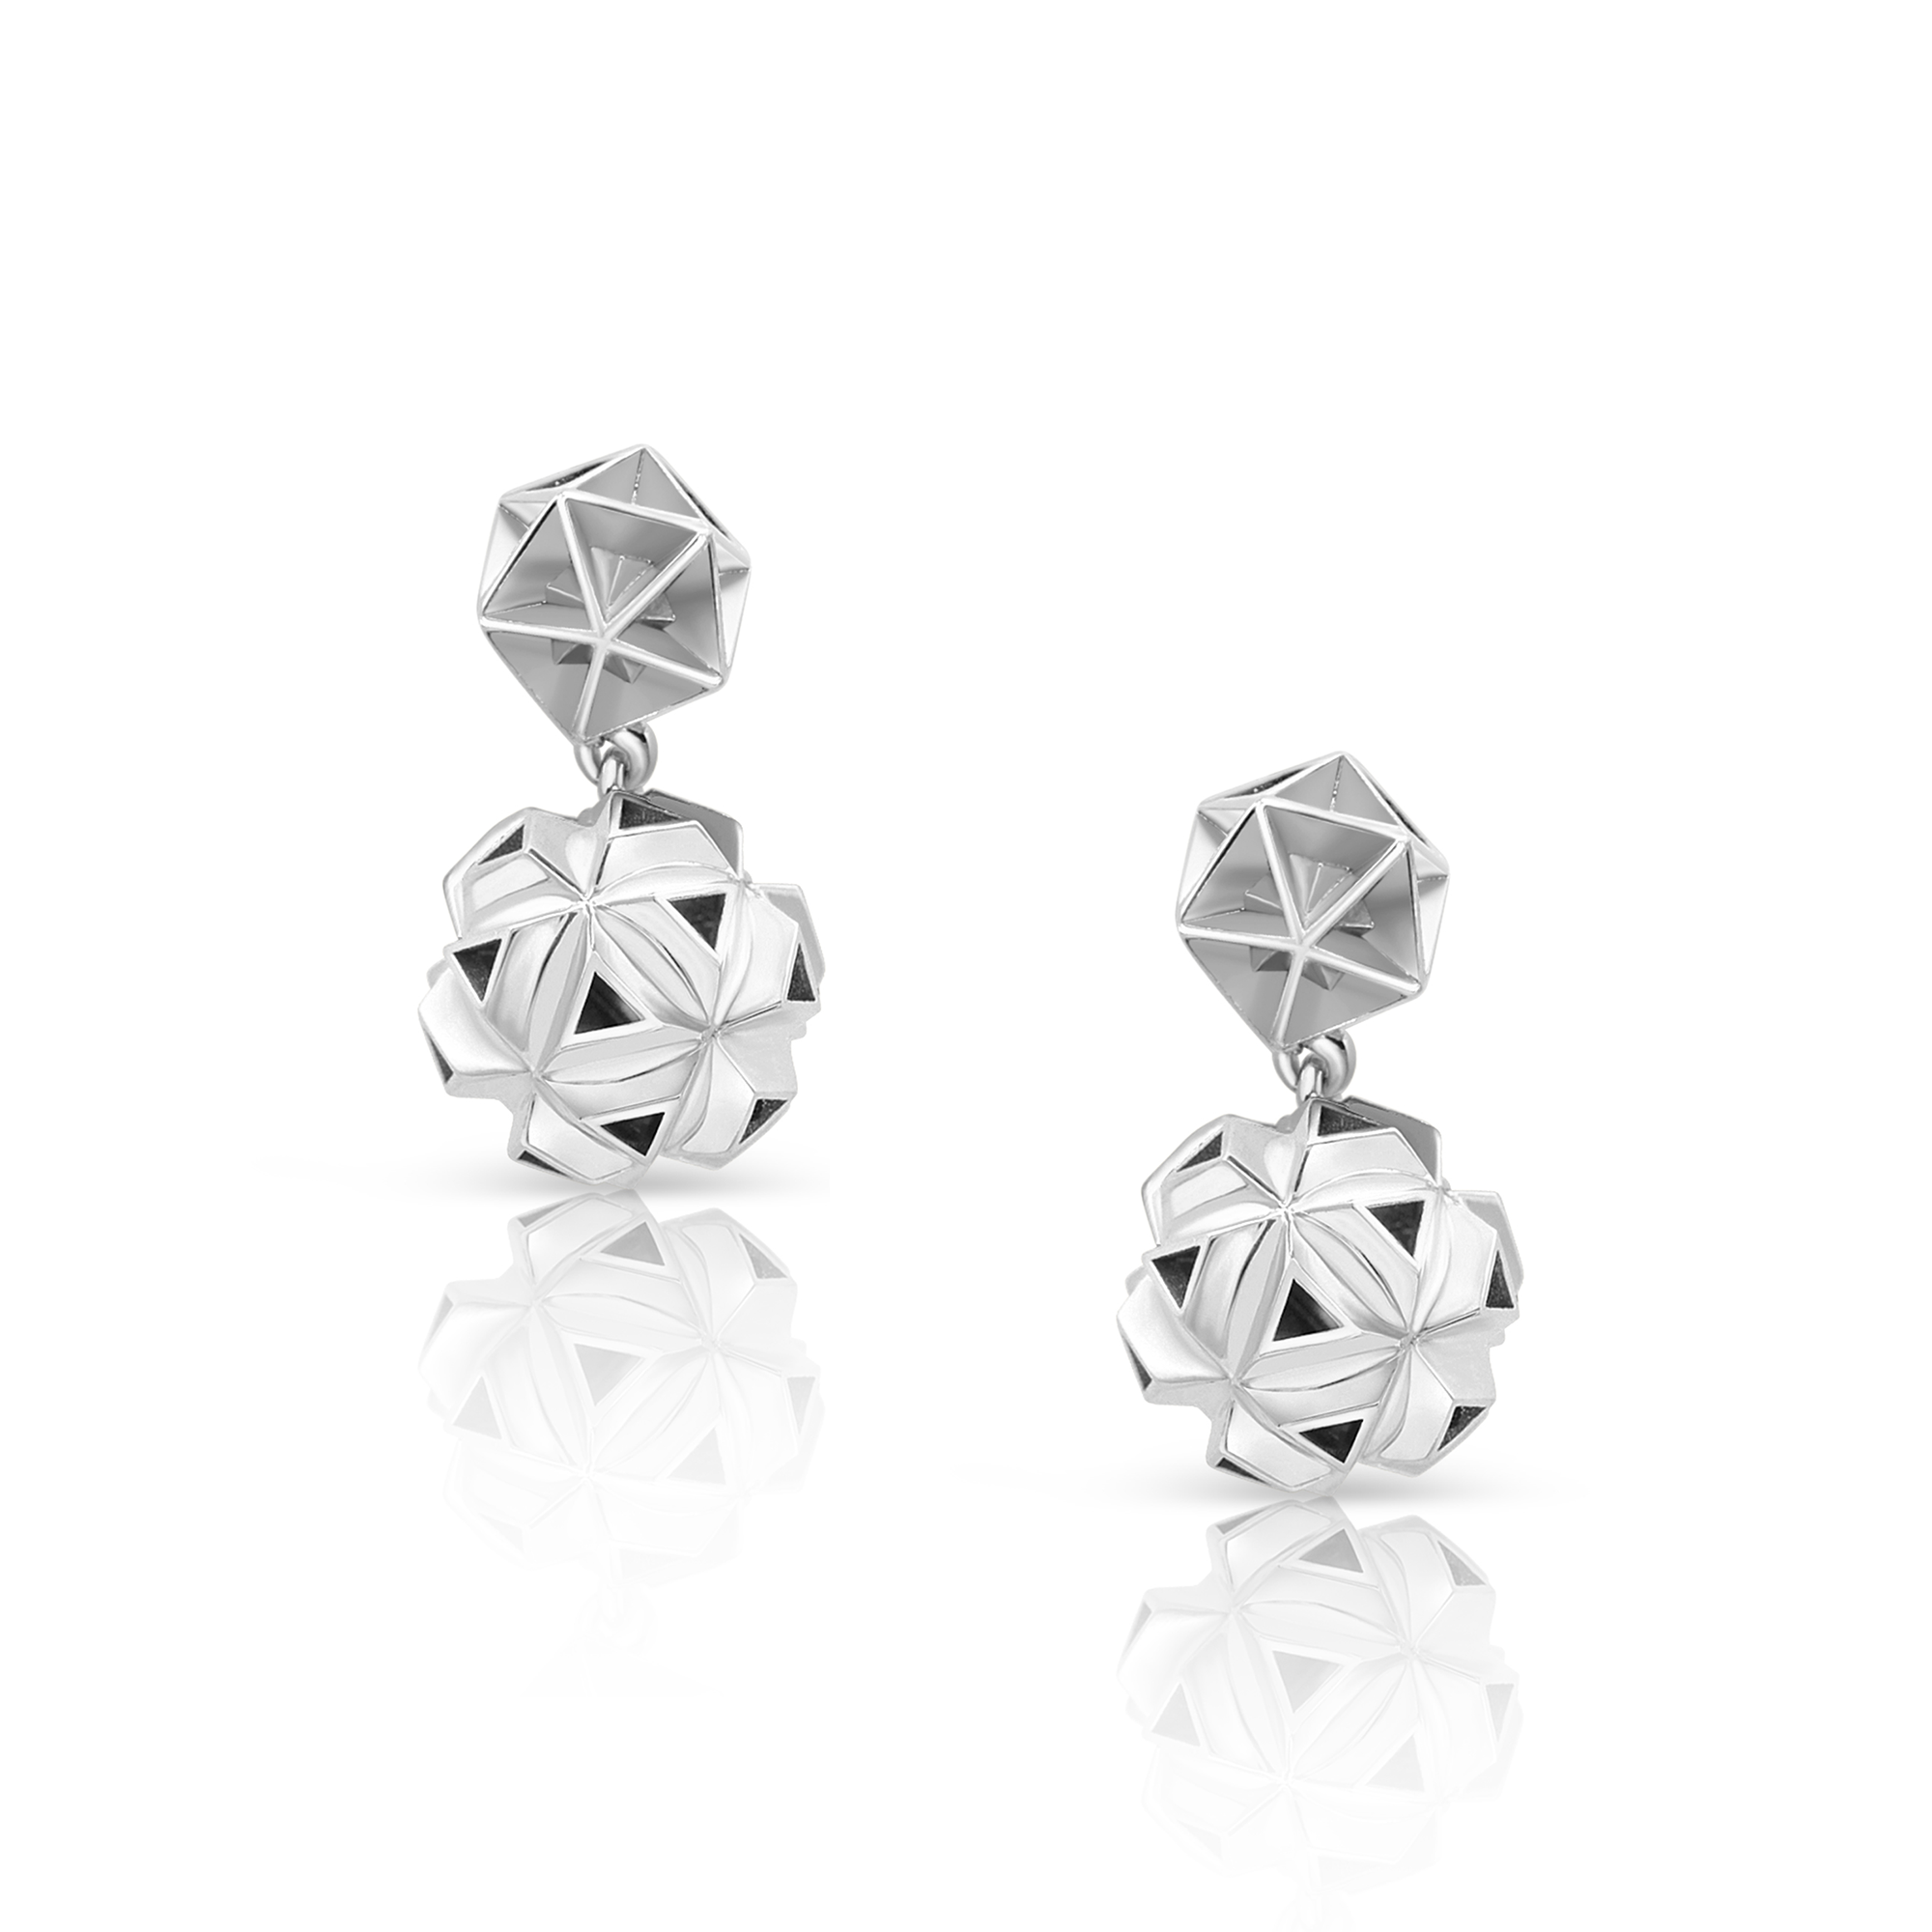 White Rhodium Plated 925 Sterling Silver Earrings Designer Fine Jewelry Floral Bouquet Earrings Polished